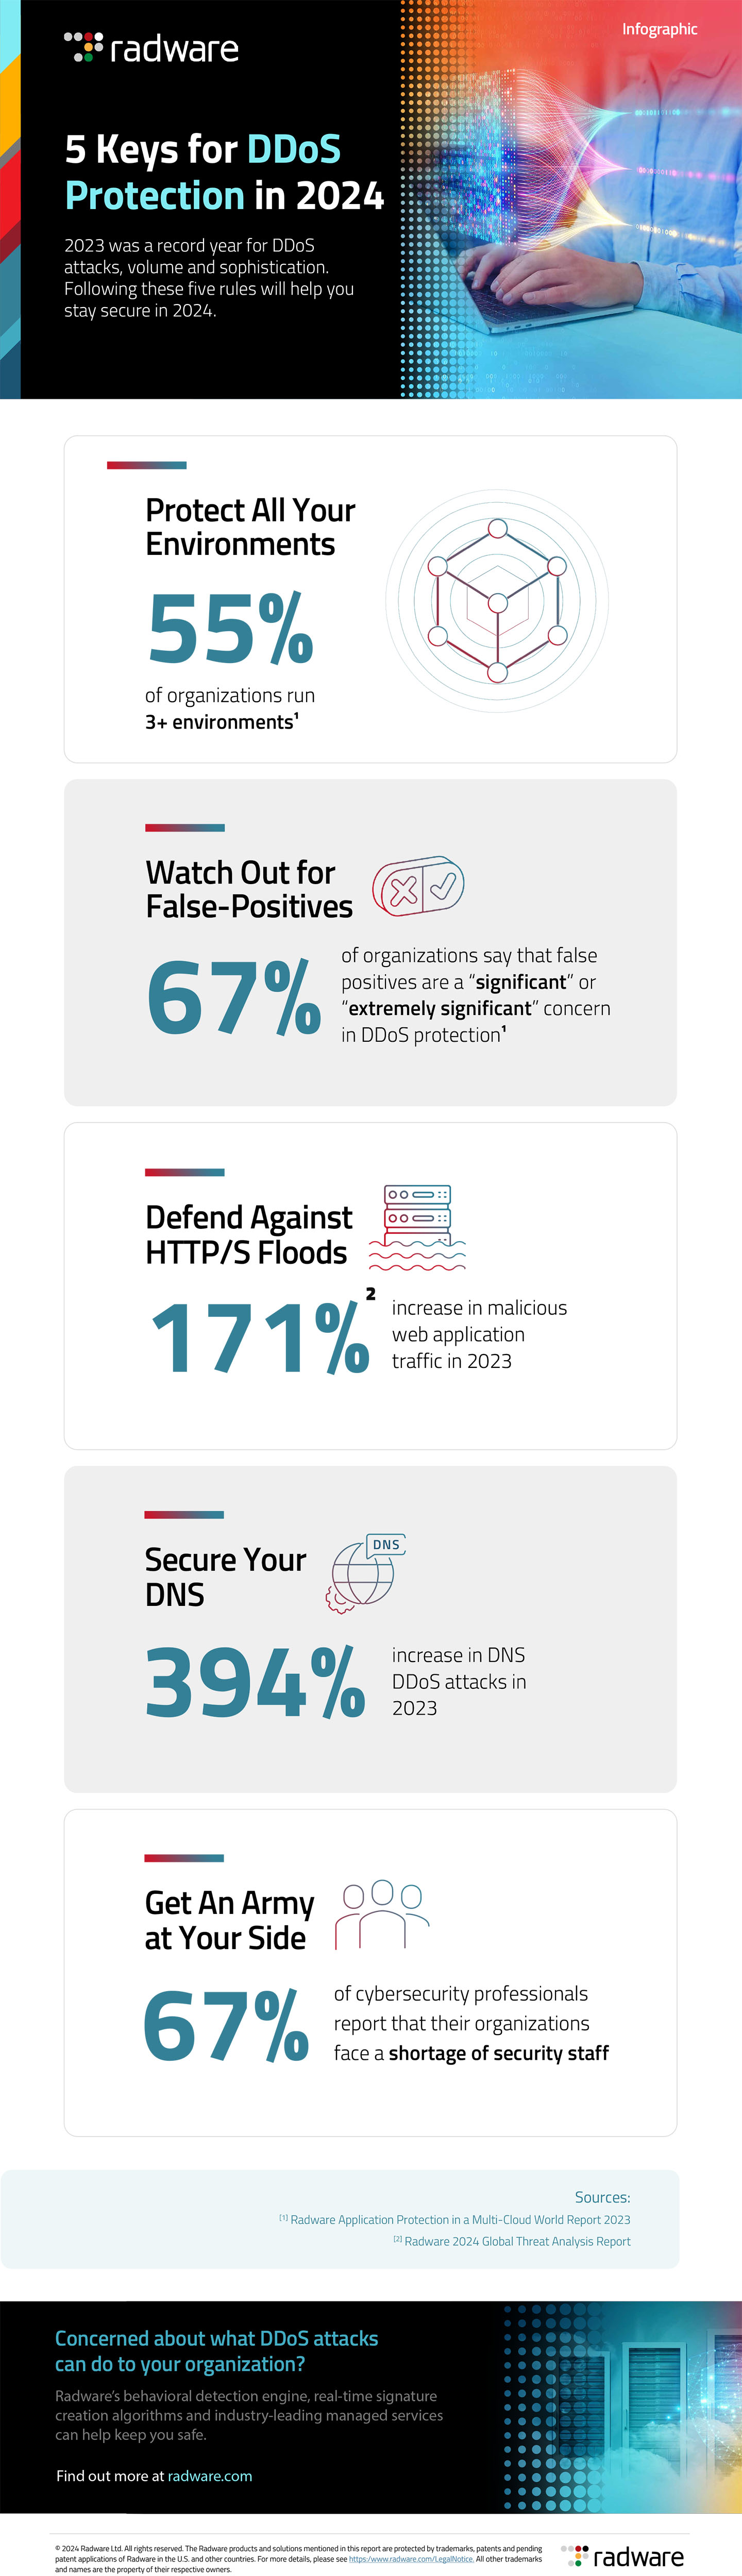 5 Keys for DDoS Protection in 2024